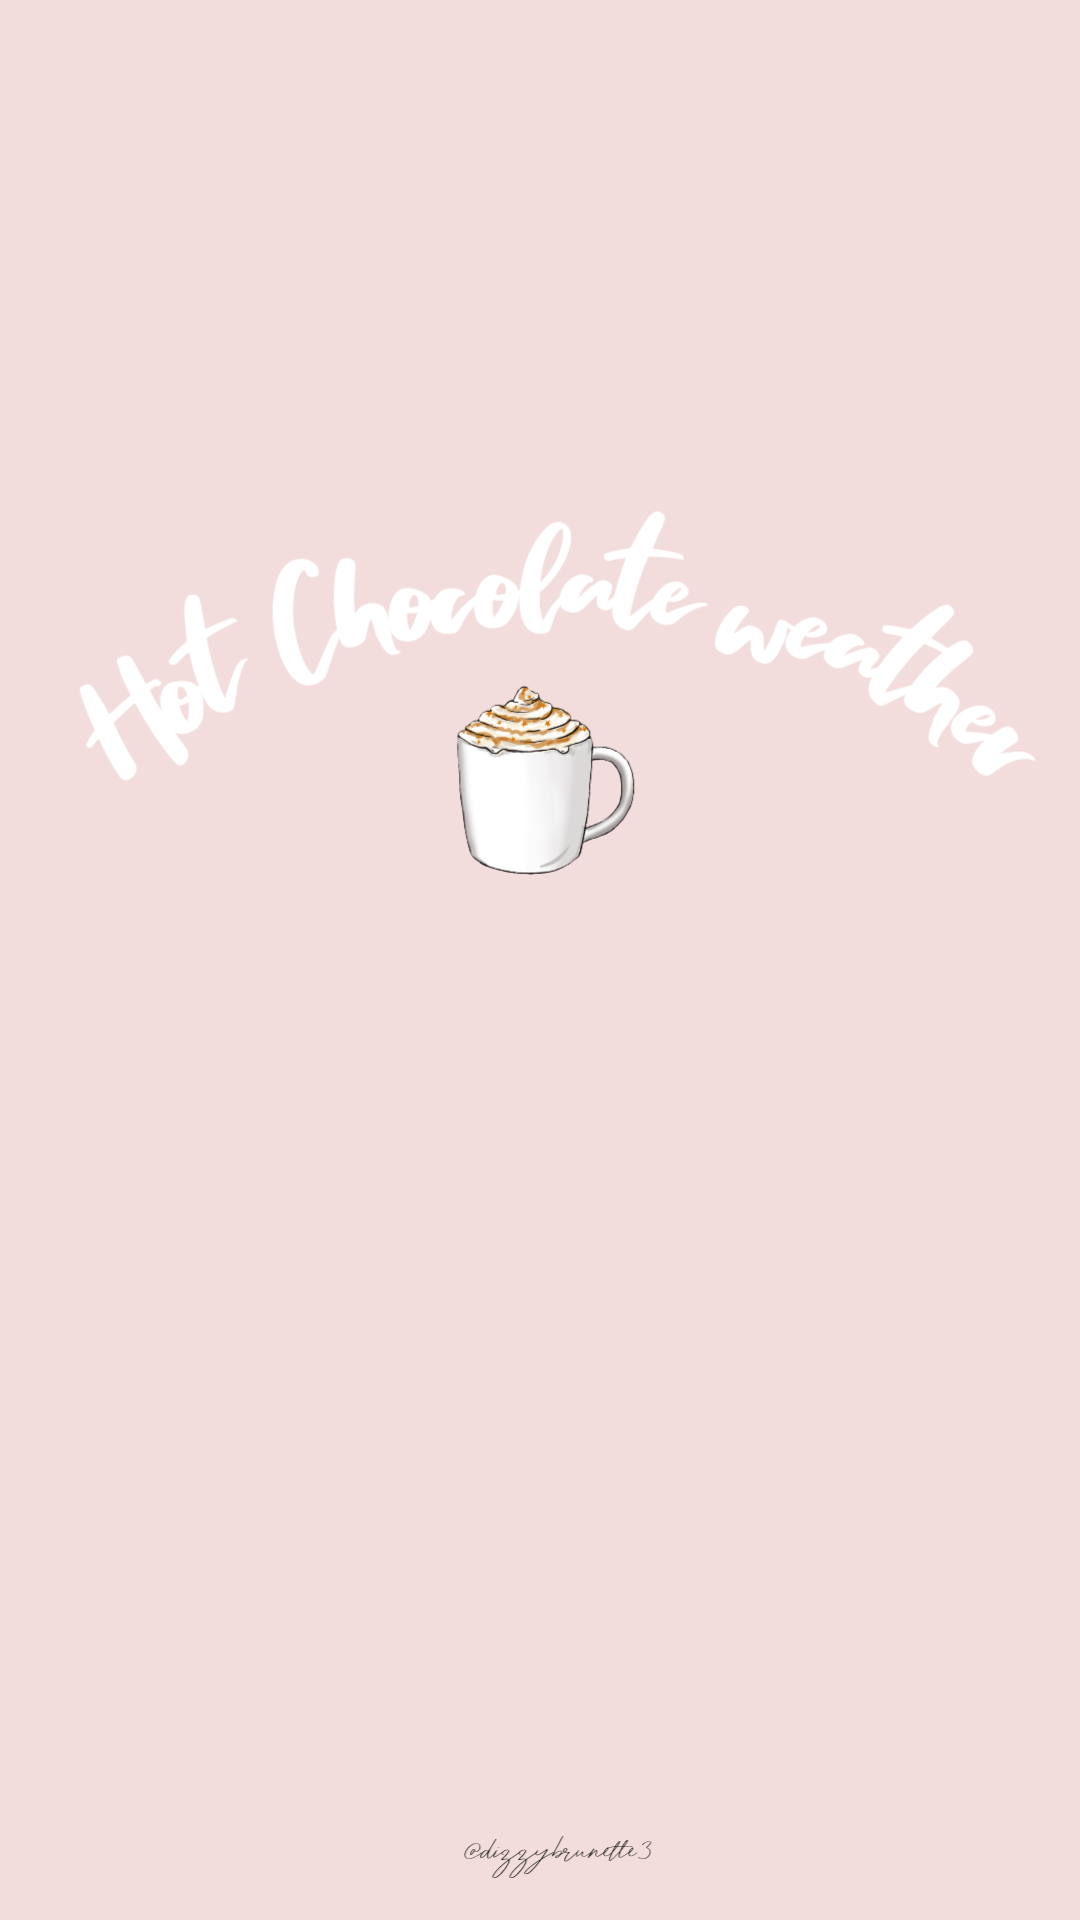 A hot chocolate cup on pink background - Cute Christmas